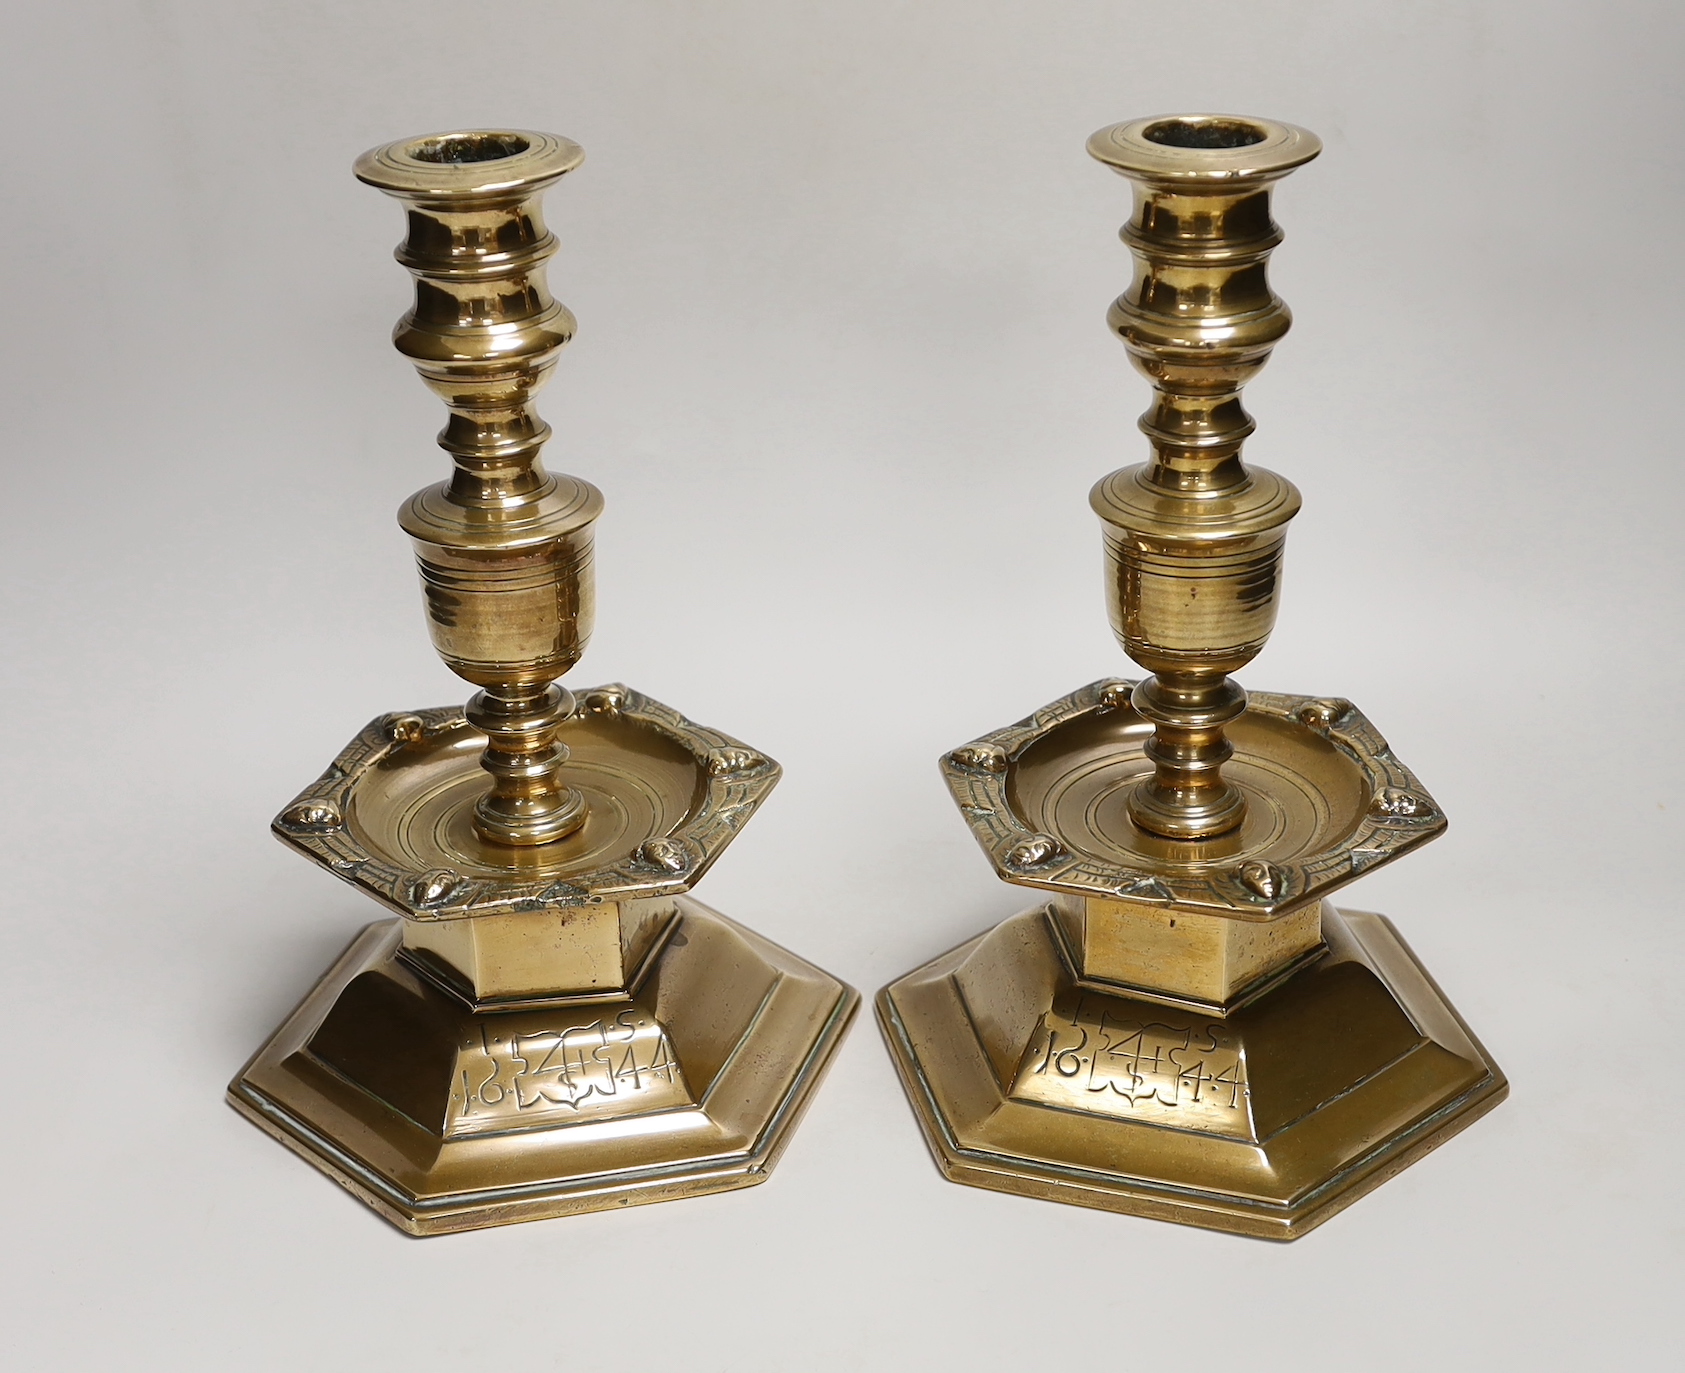 A pair of Scandinavian, possibly 17th century, brass candlesticks, dated 1644, each with a shield enclosing merchants mark, each with hexagonal base and hexagonal drip tray cast with marks, 27cm